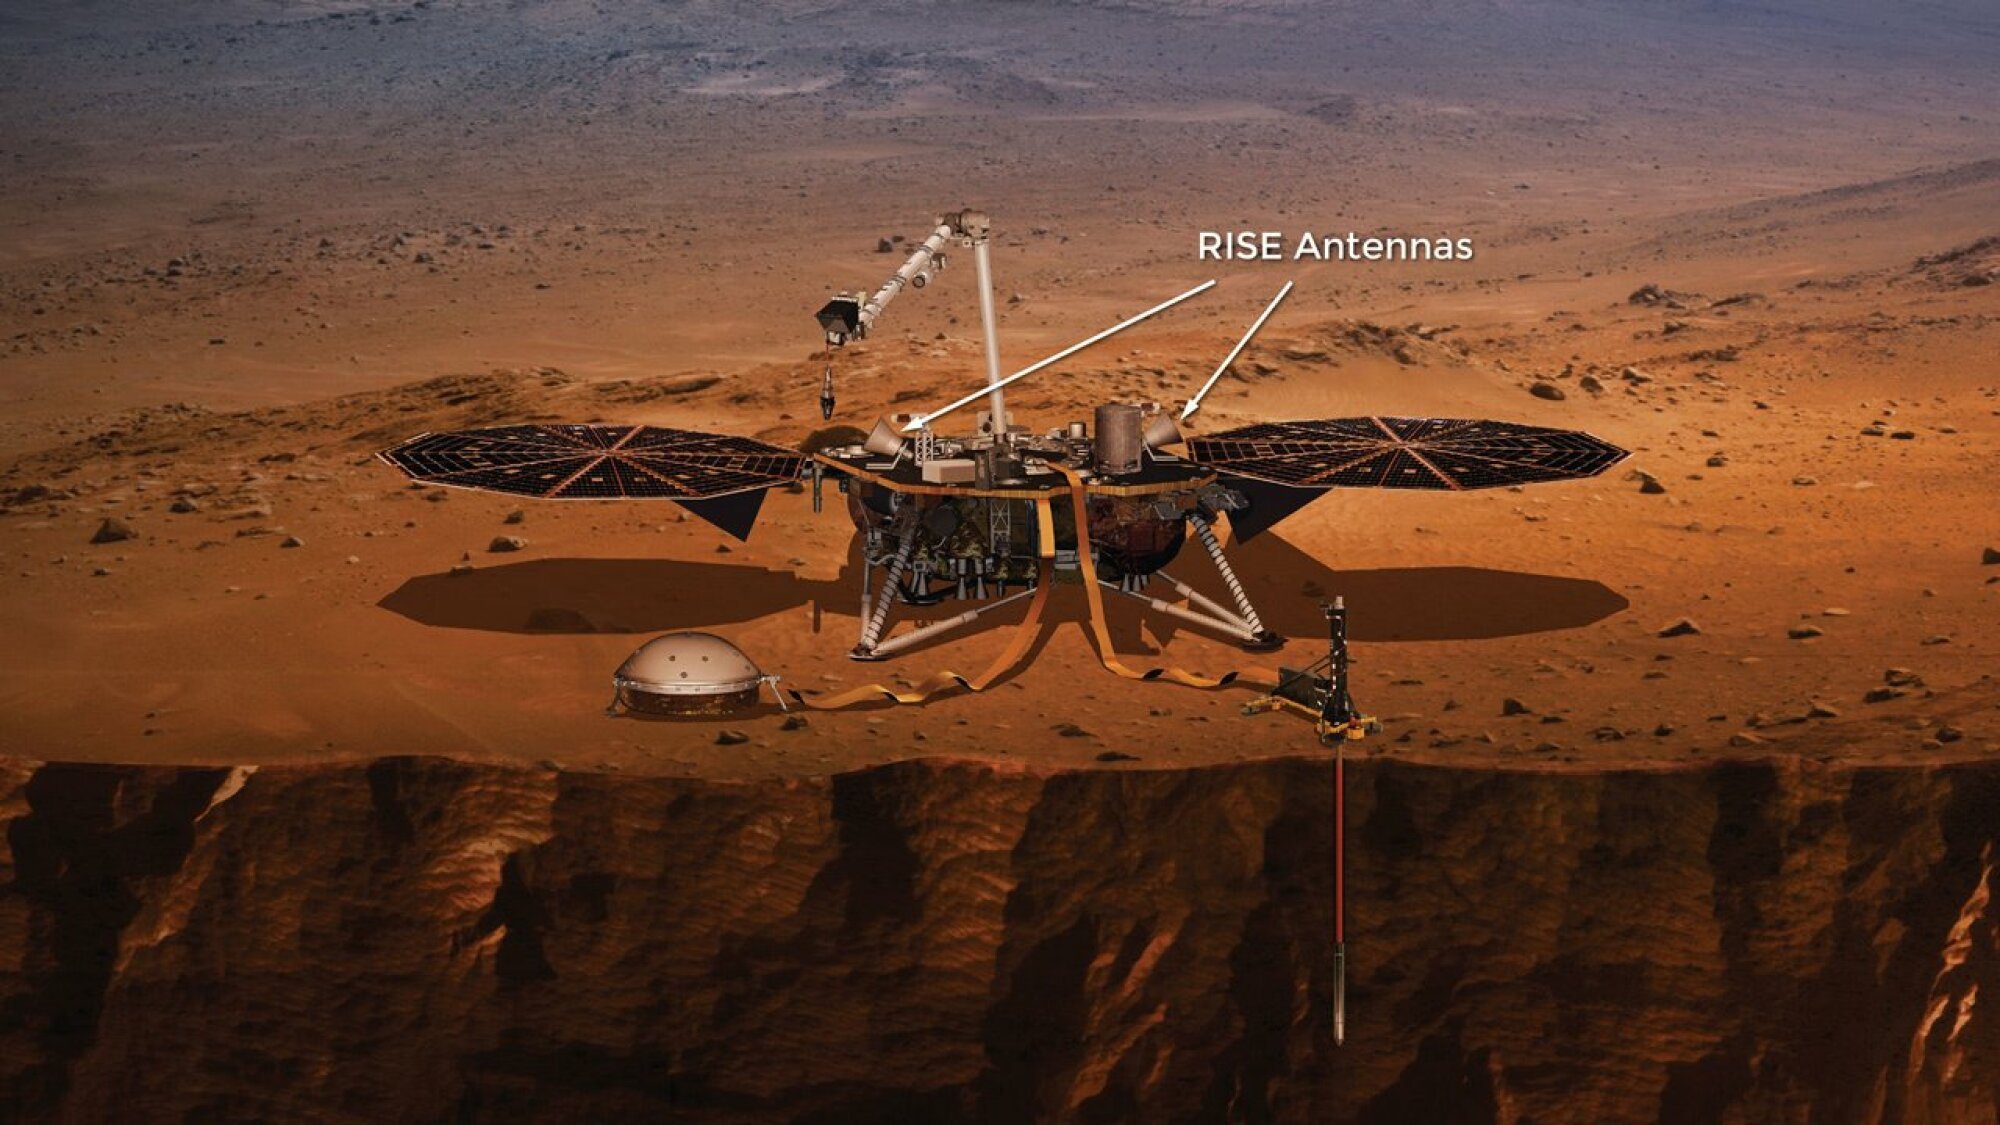 Mars Insight lander continuing to yield new science